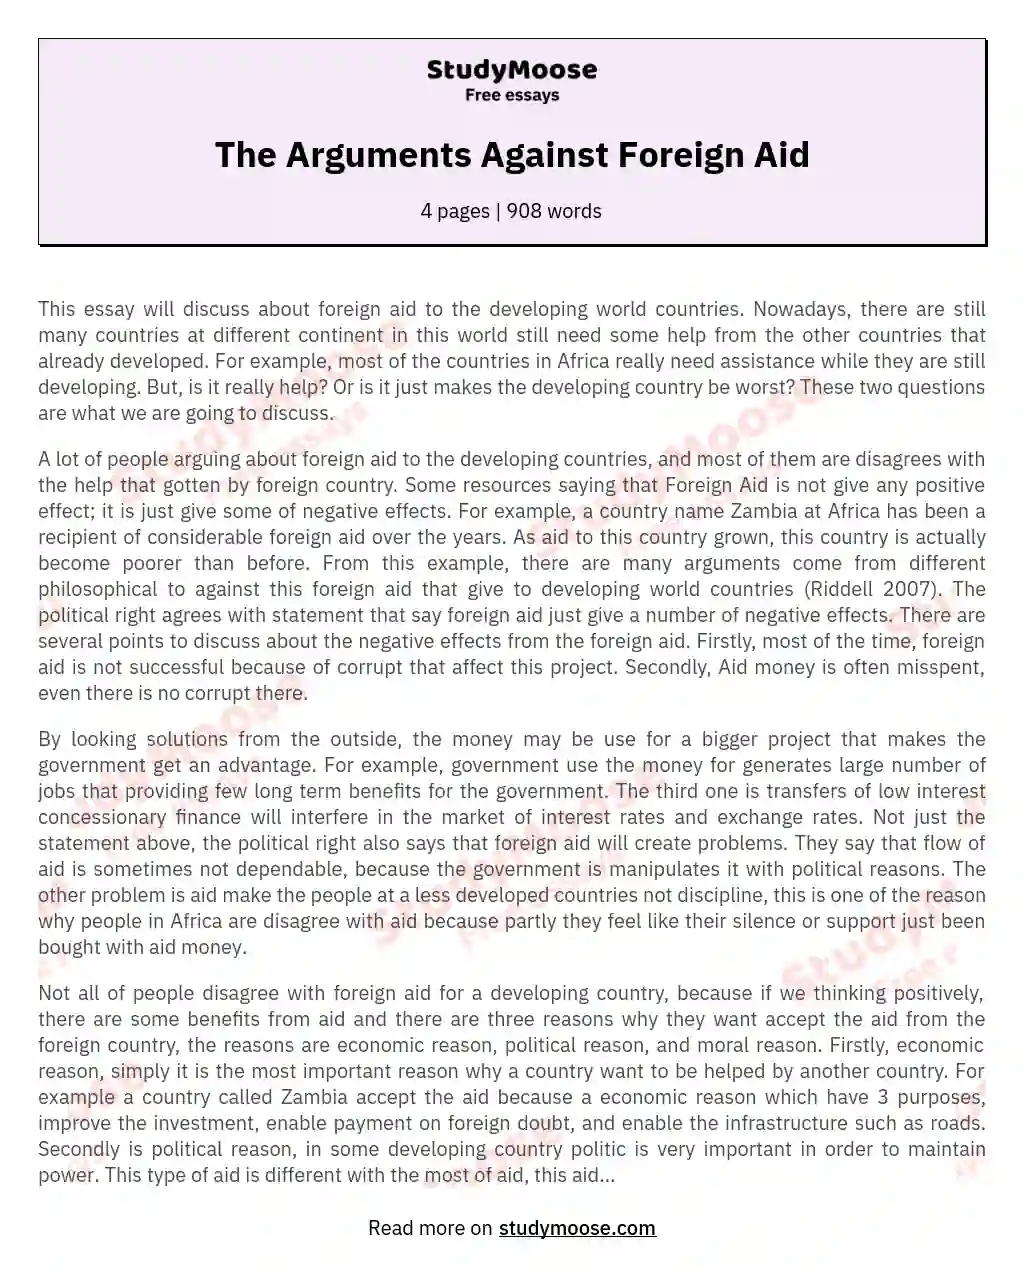 The Arguments Against Foreign Aid